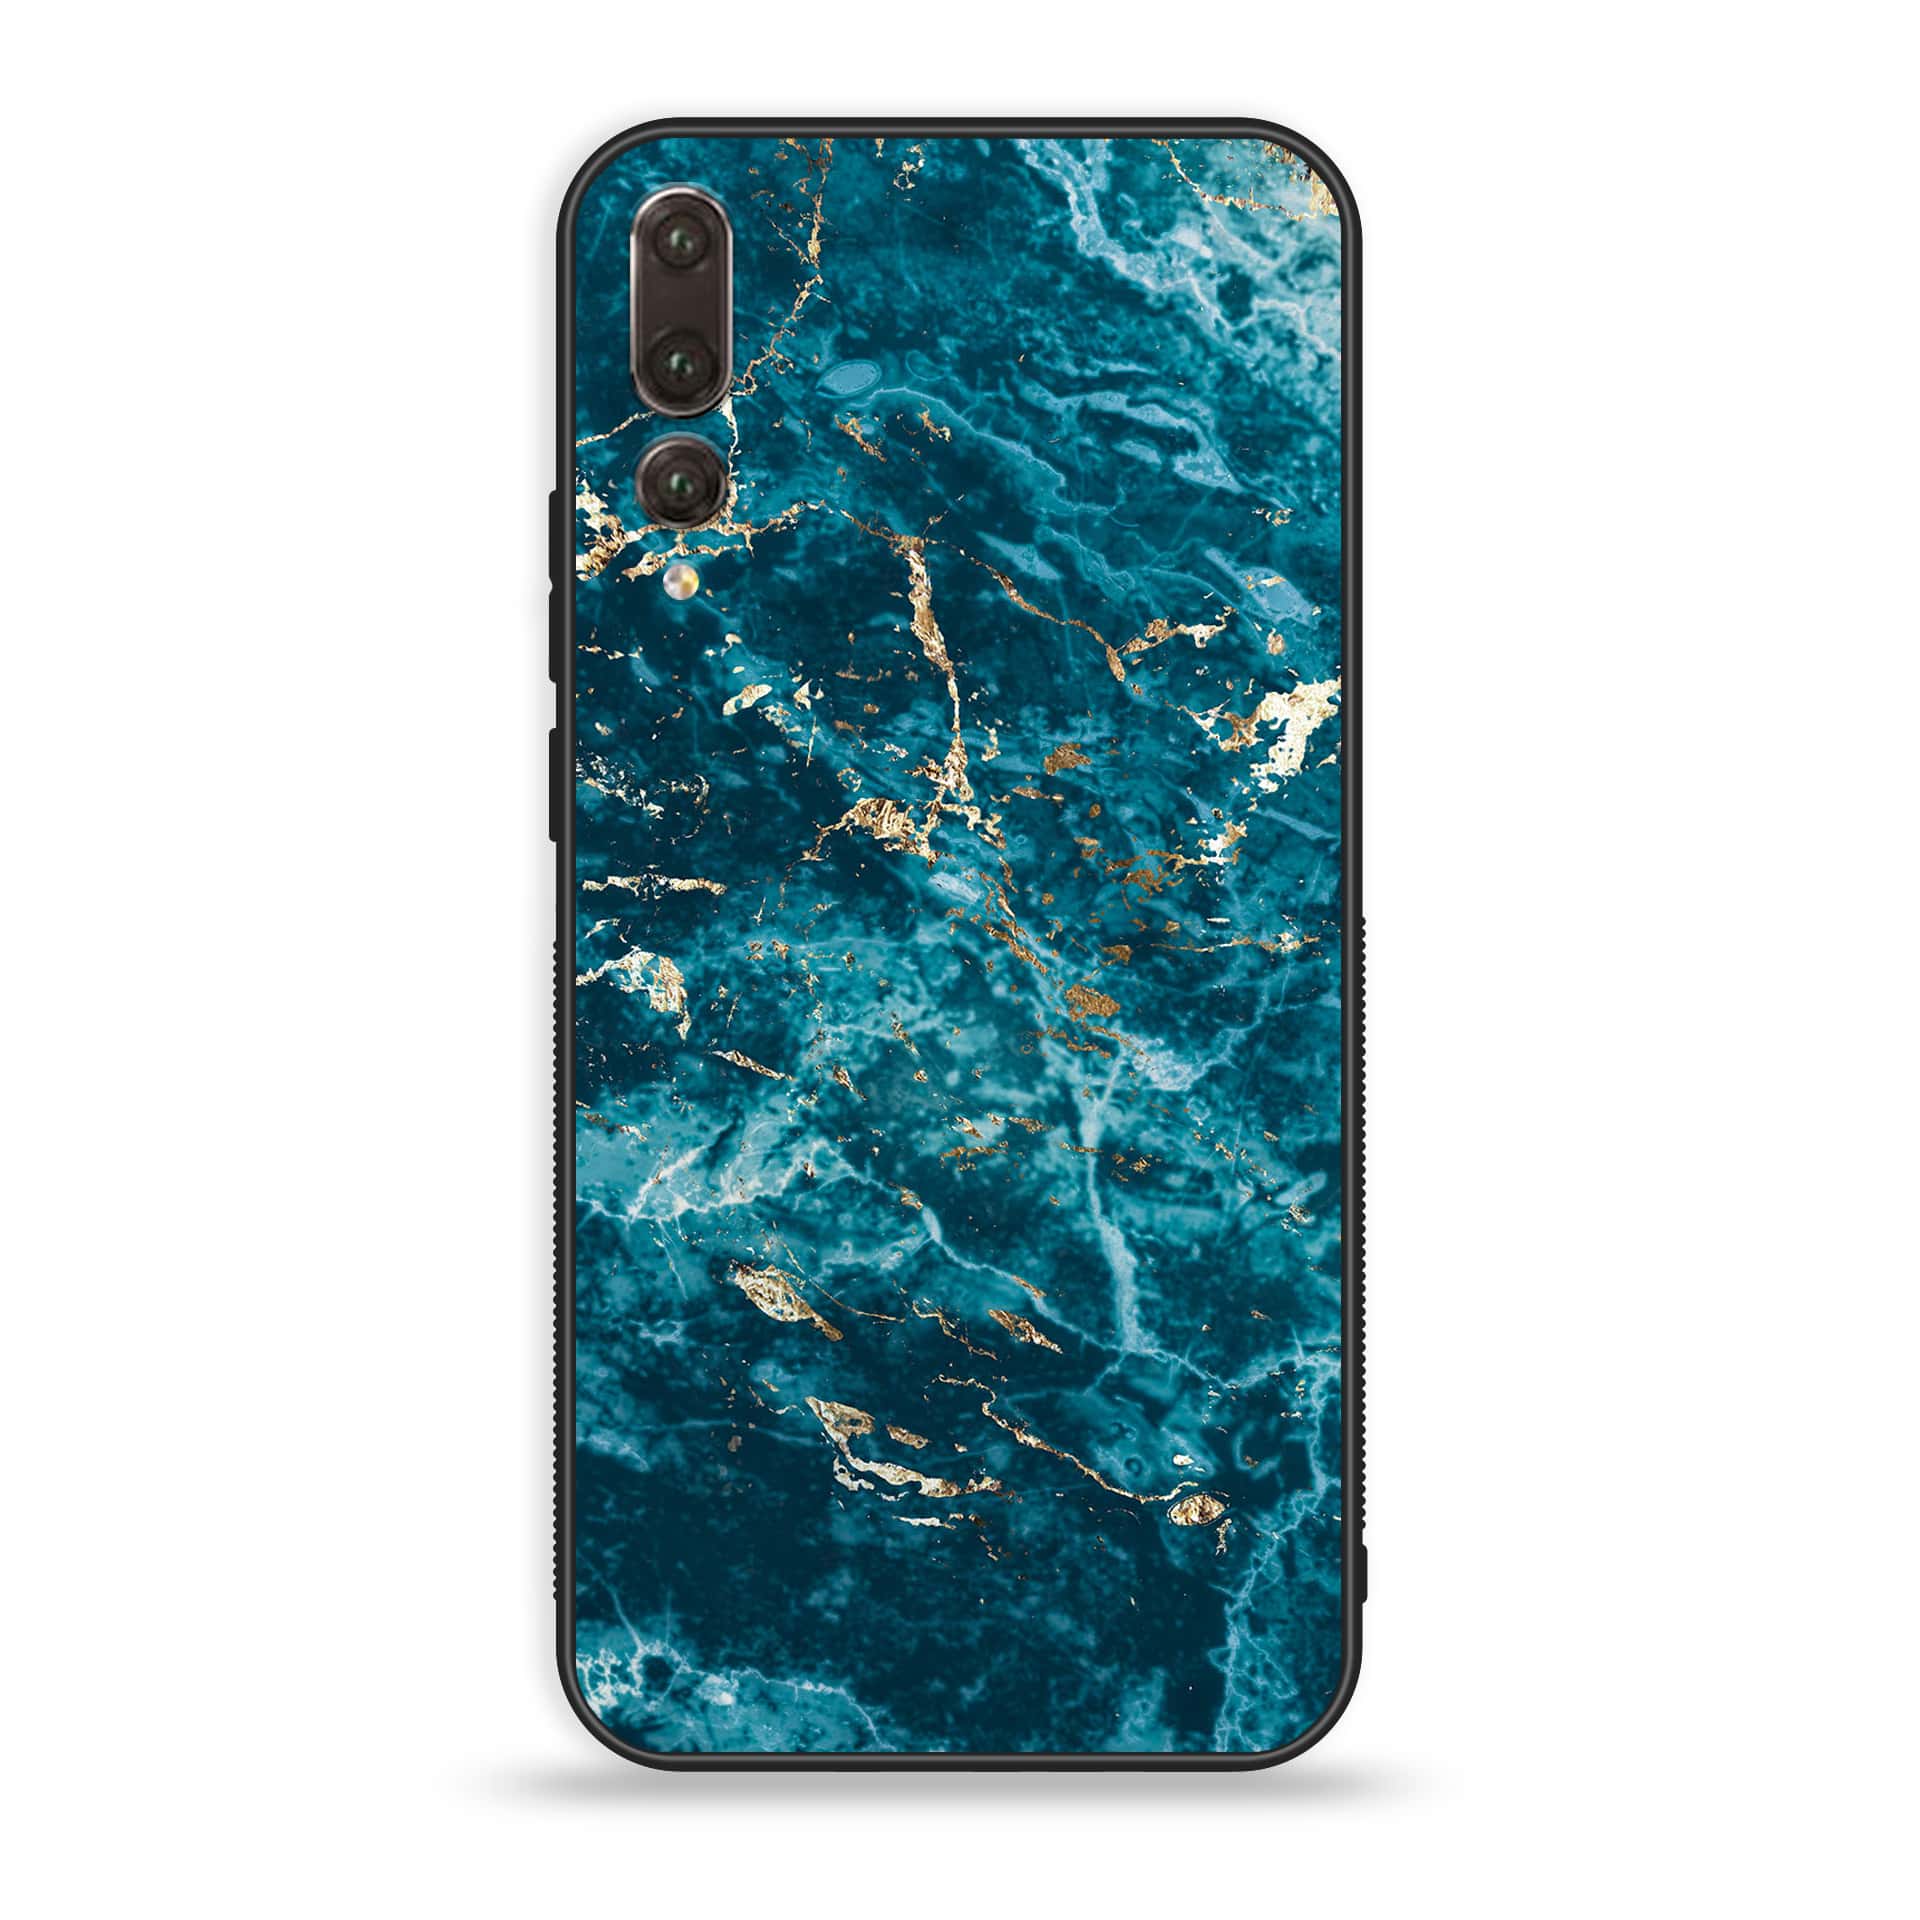 Huawei P20 Pro - Blue Marble V 2.0 Series - Premium Printed Glass soft Bumper shock Proof Case